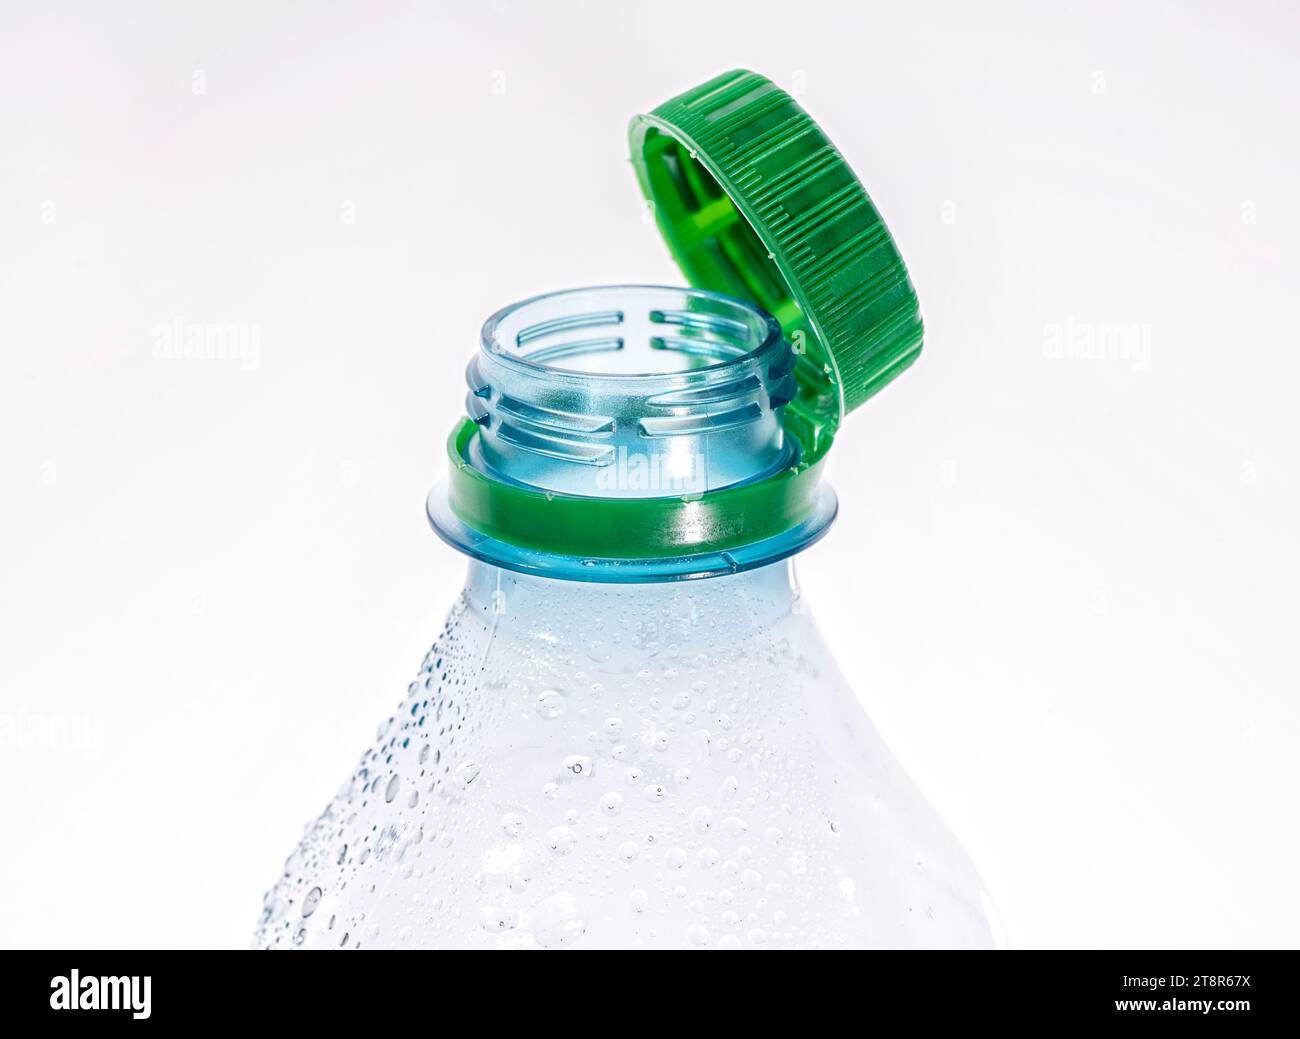 Detail of a Plastic bottle with tethered cap Stock Photo